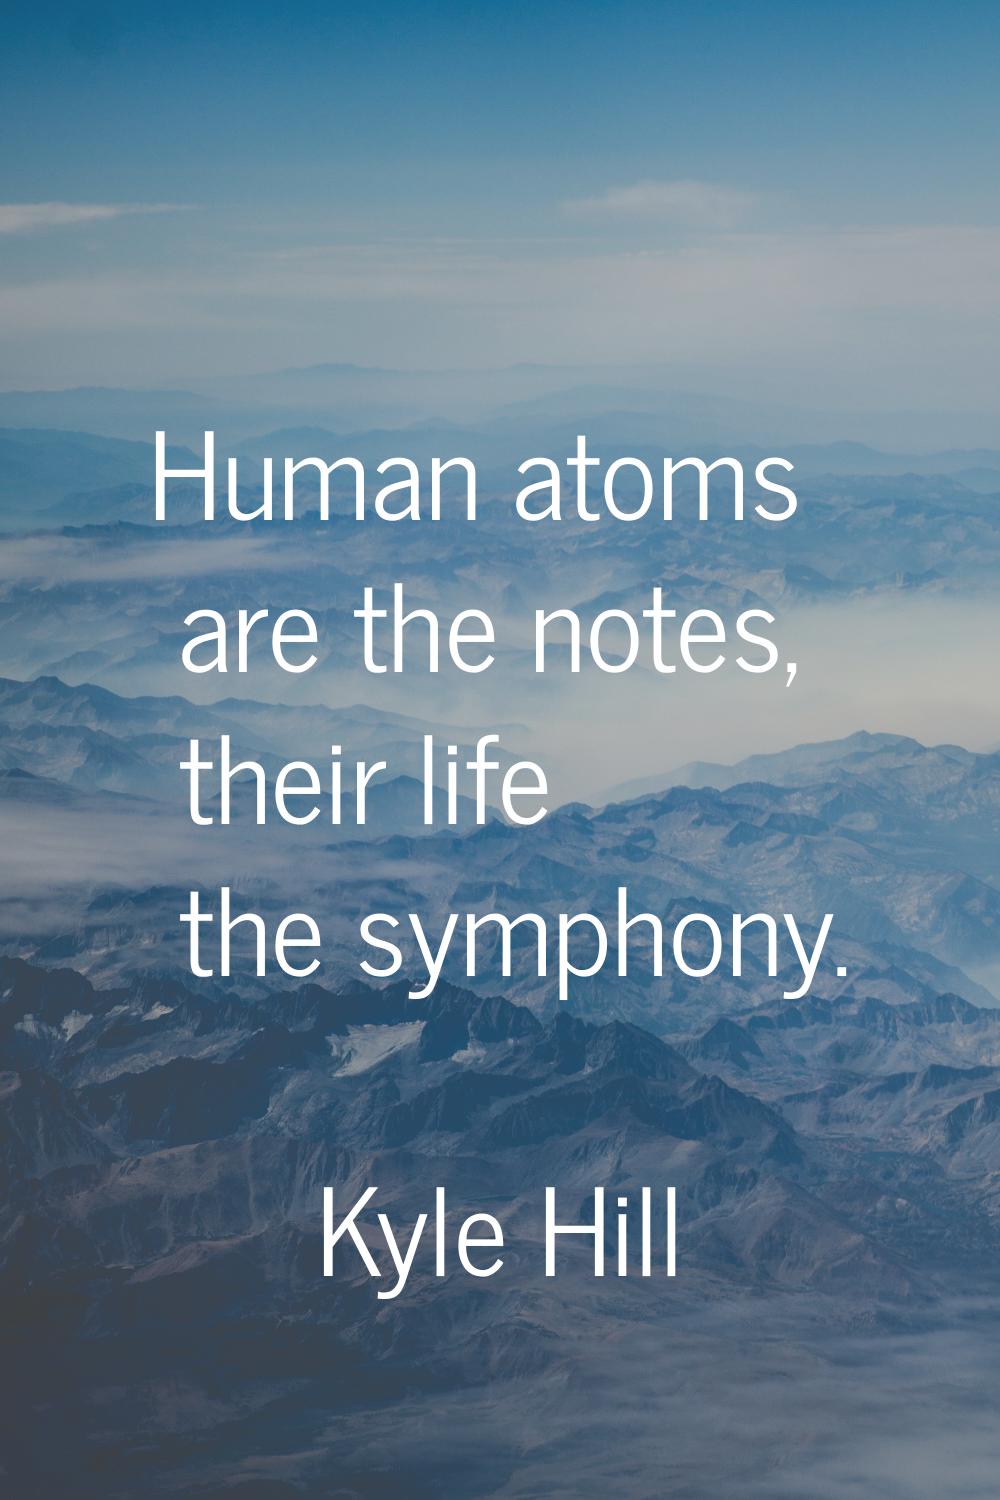 Human atoms are the notes, their life the symphony.